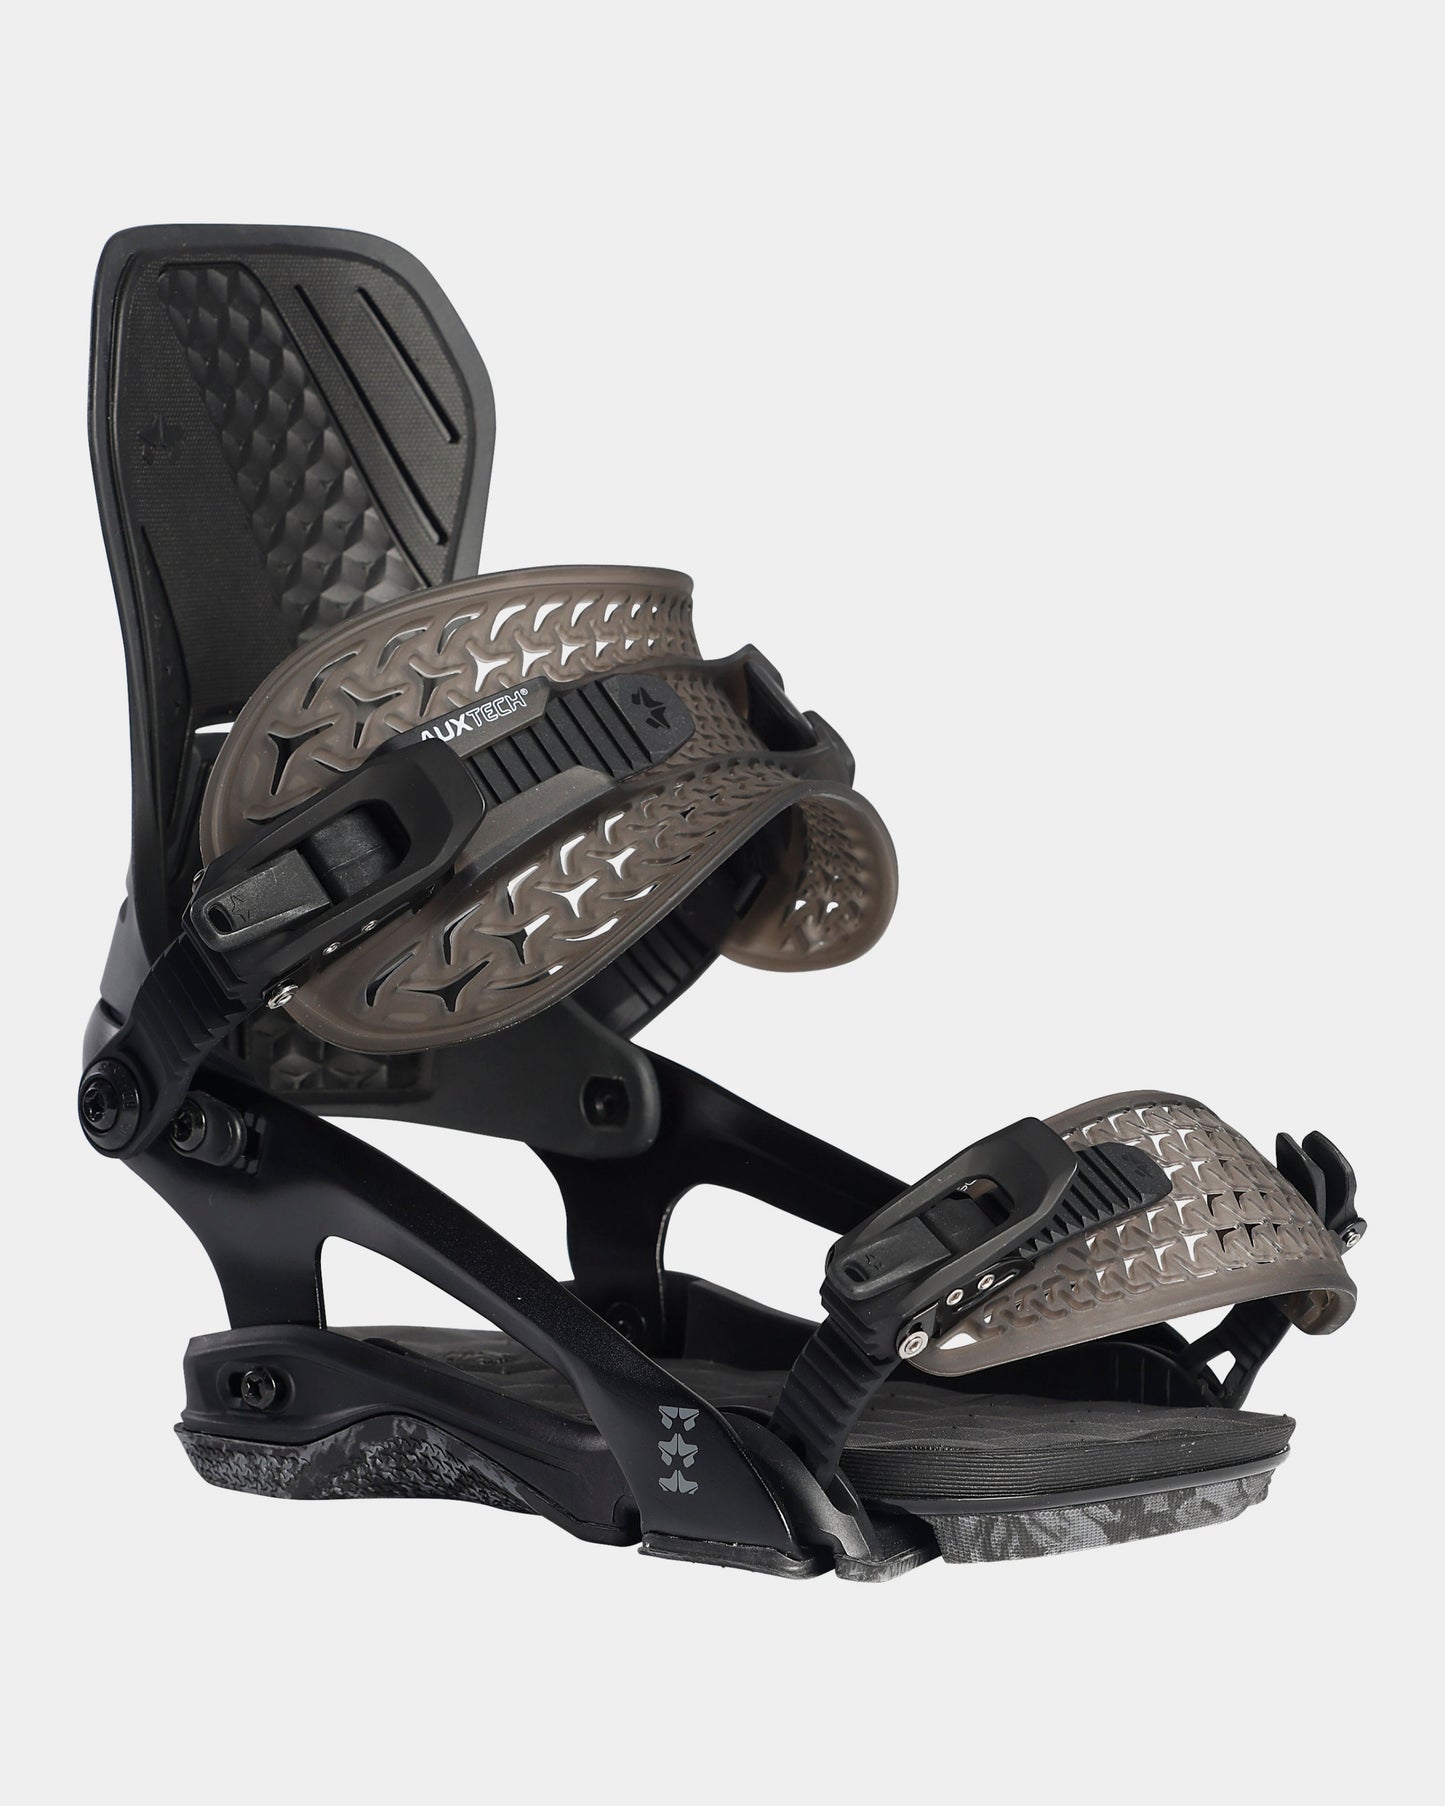 Rome dod 2022 mens snowboard bindings product photo from the side cover shot in the studio color black